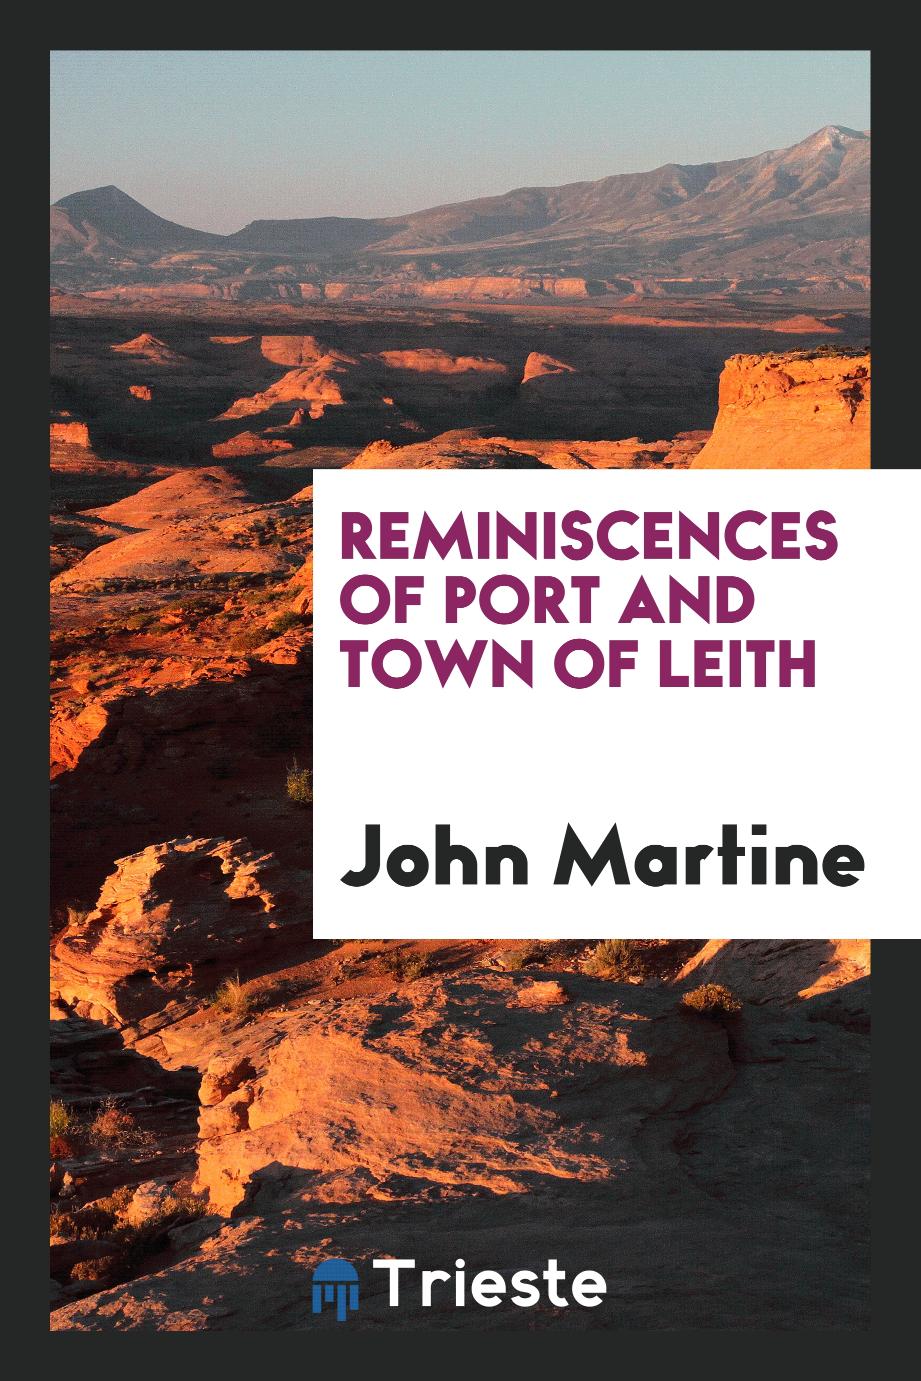 Reminiscences of Port and Town of Leith